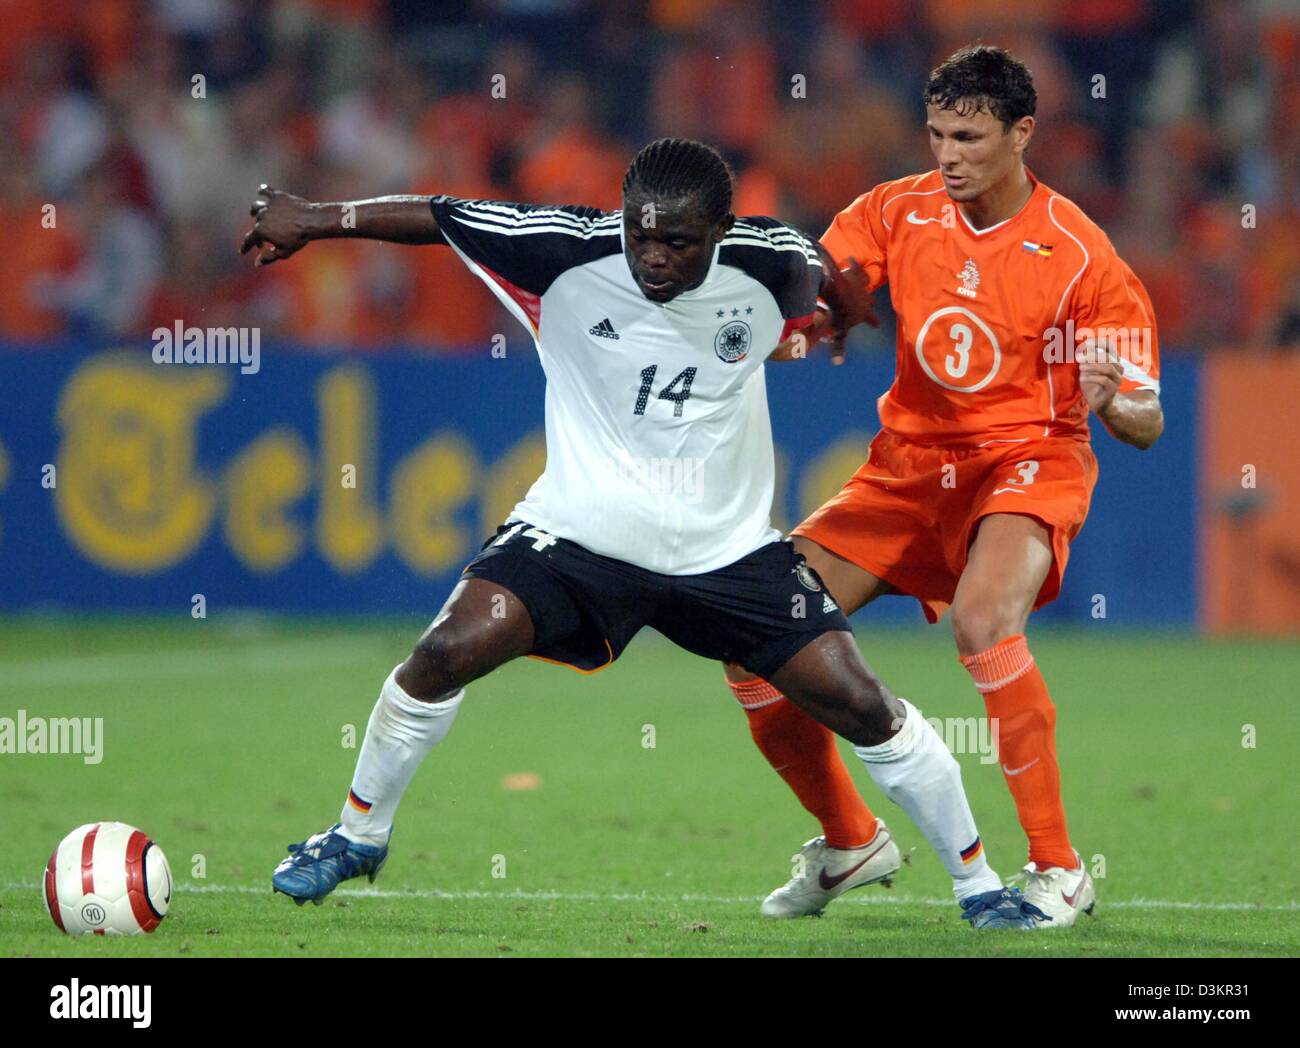 (dpa) - German national soccer player Gerald Asamoah (L) fights for the ball with Dutch national player Khalid Boulahrouz during the friendly match Netherlands vs Germany at the 'De Kuip' stadium in Rotterdam, Netherlands, 17 August 2005. The game ended in a 2-2 draw. Photo: Bernd Weissbrod Stock Photo